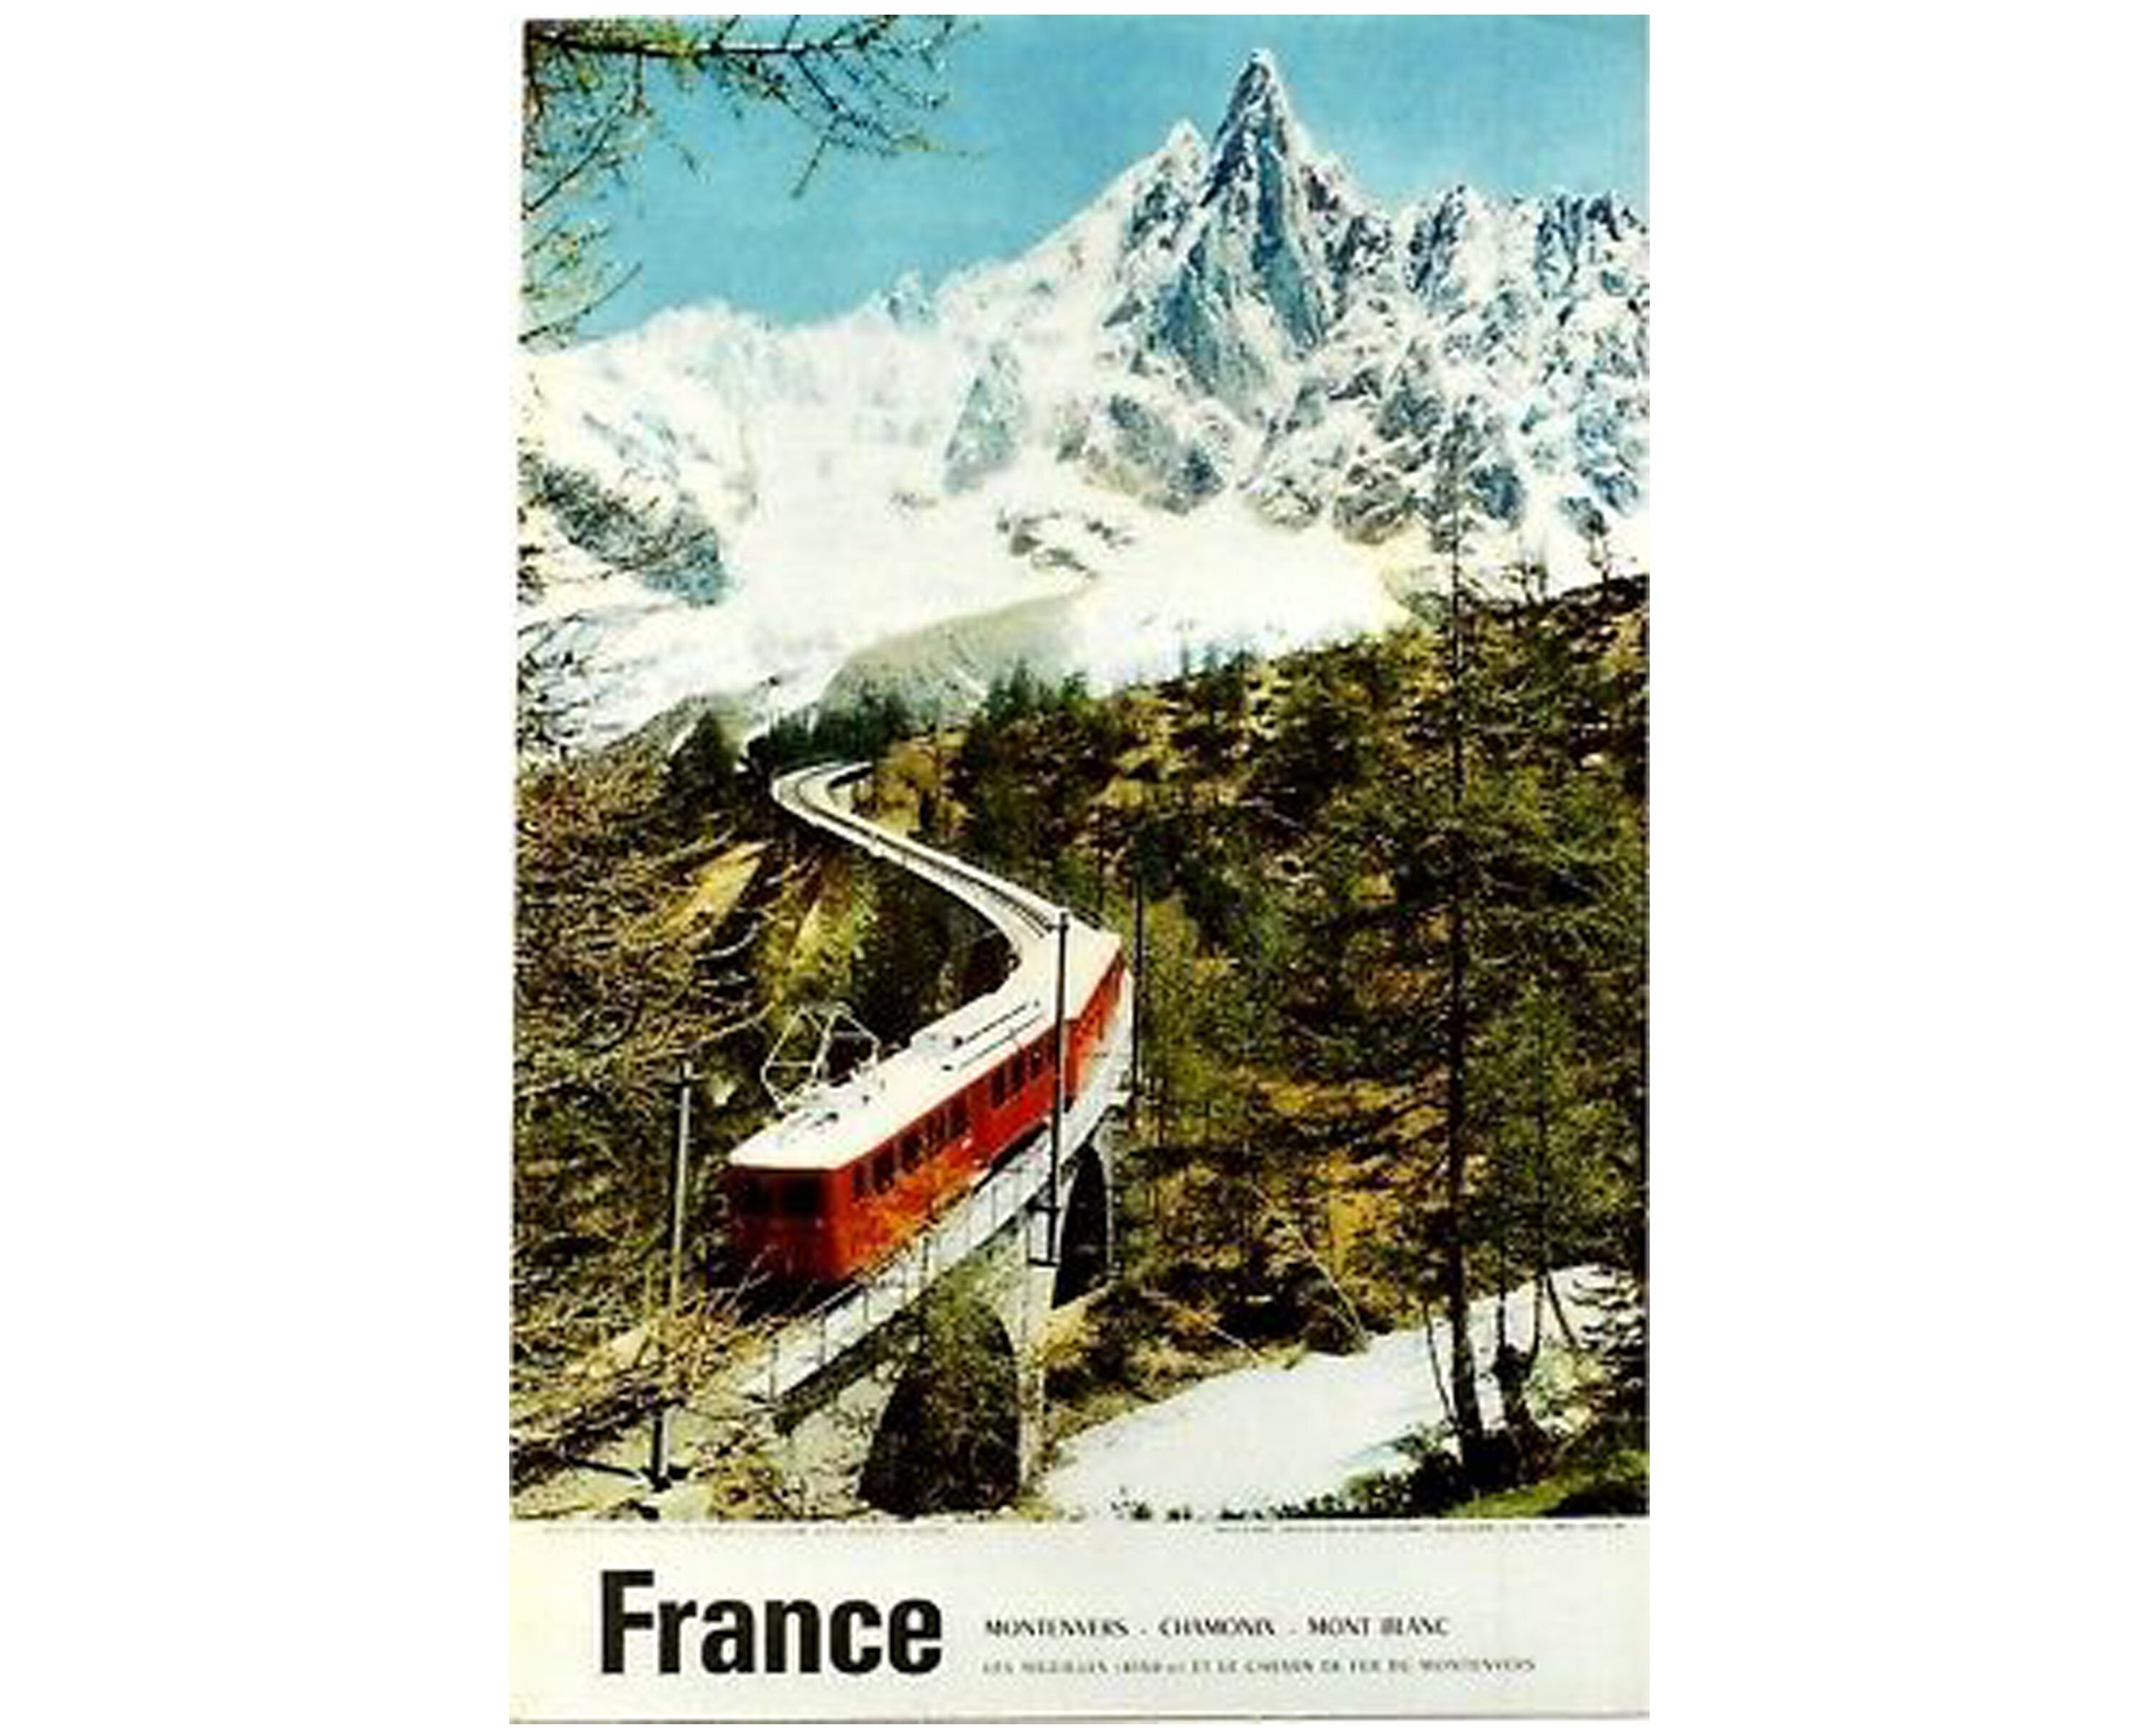 Vintage CHAMONIX MONT BLANC FRANCE Skiing/Travel Poster A1A2A3A4Sizes 